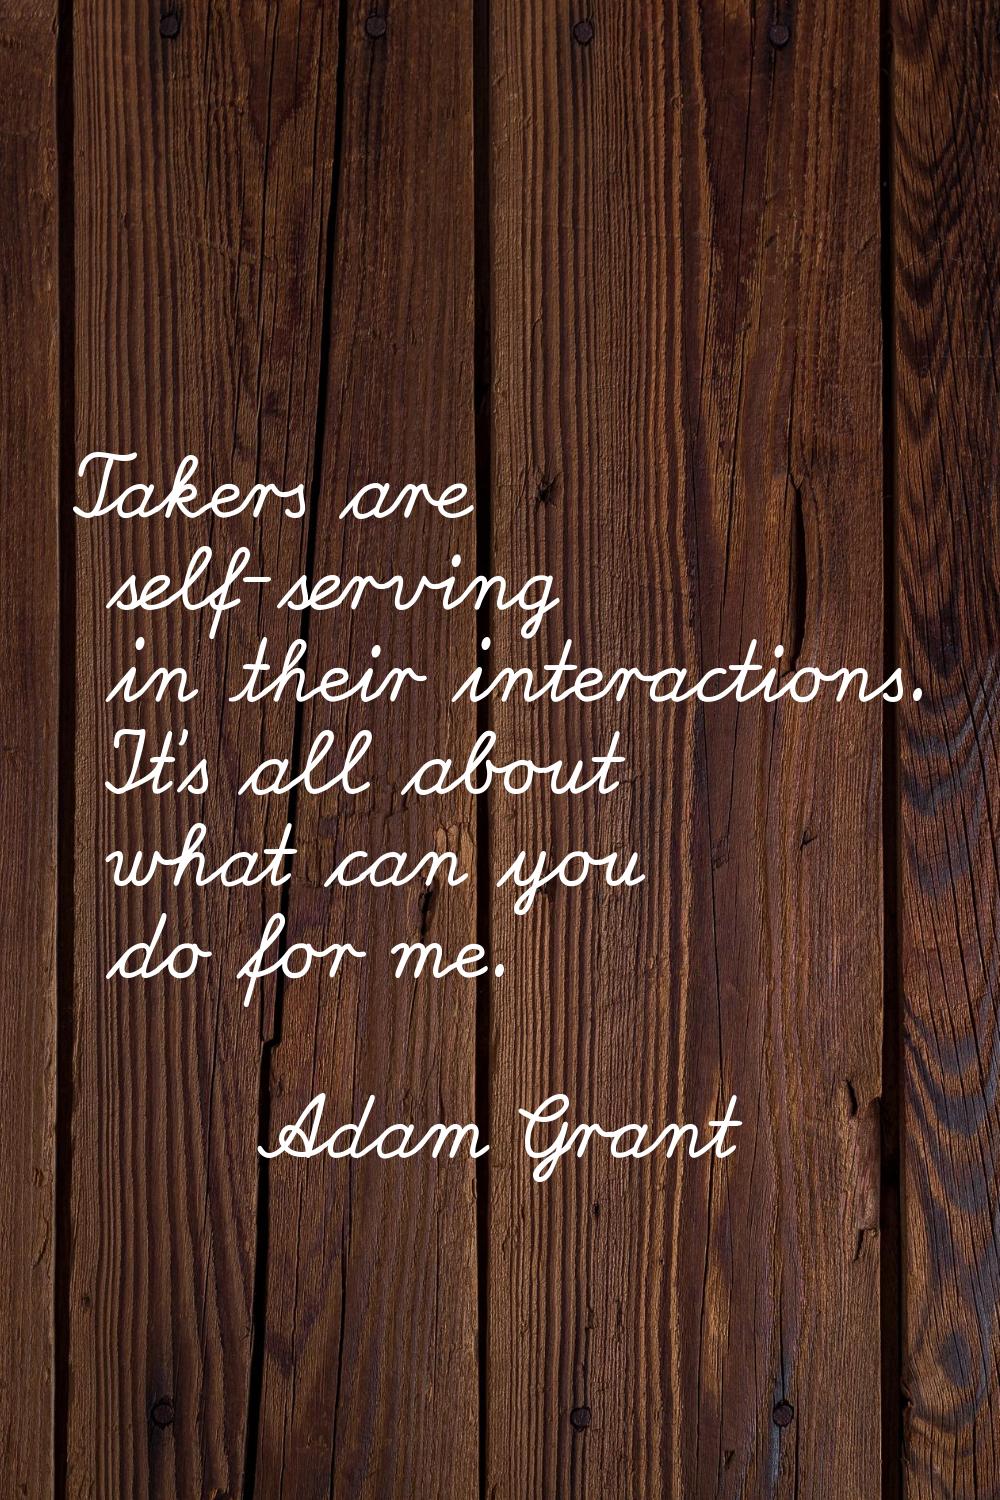 Takers are self-serving in their interactions. It's all about what can you do for me.